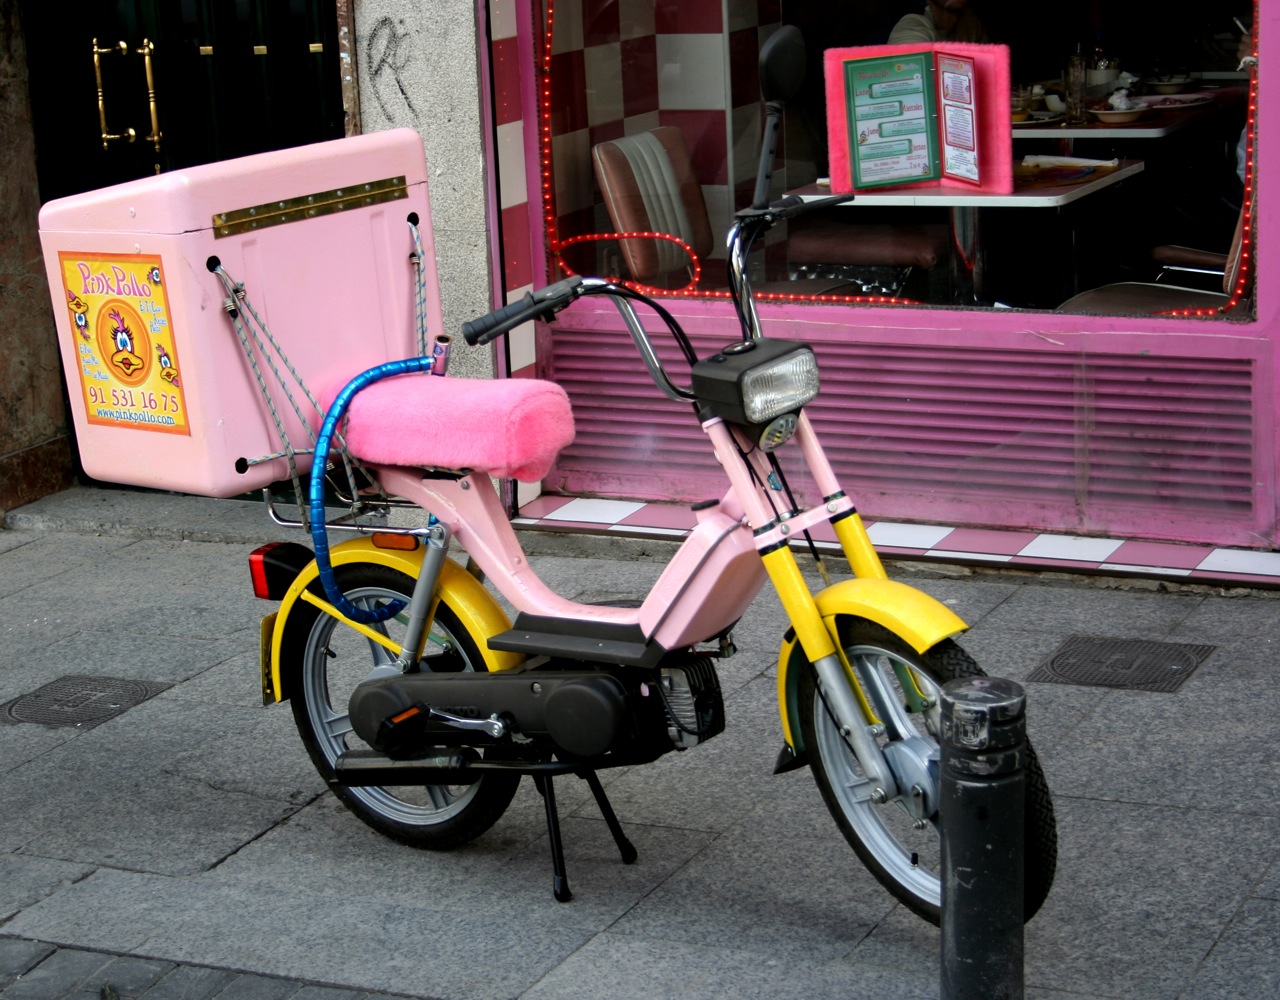 a yellow moped is parked outside a storefront